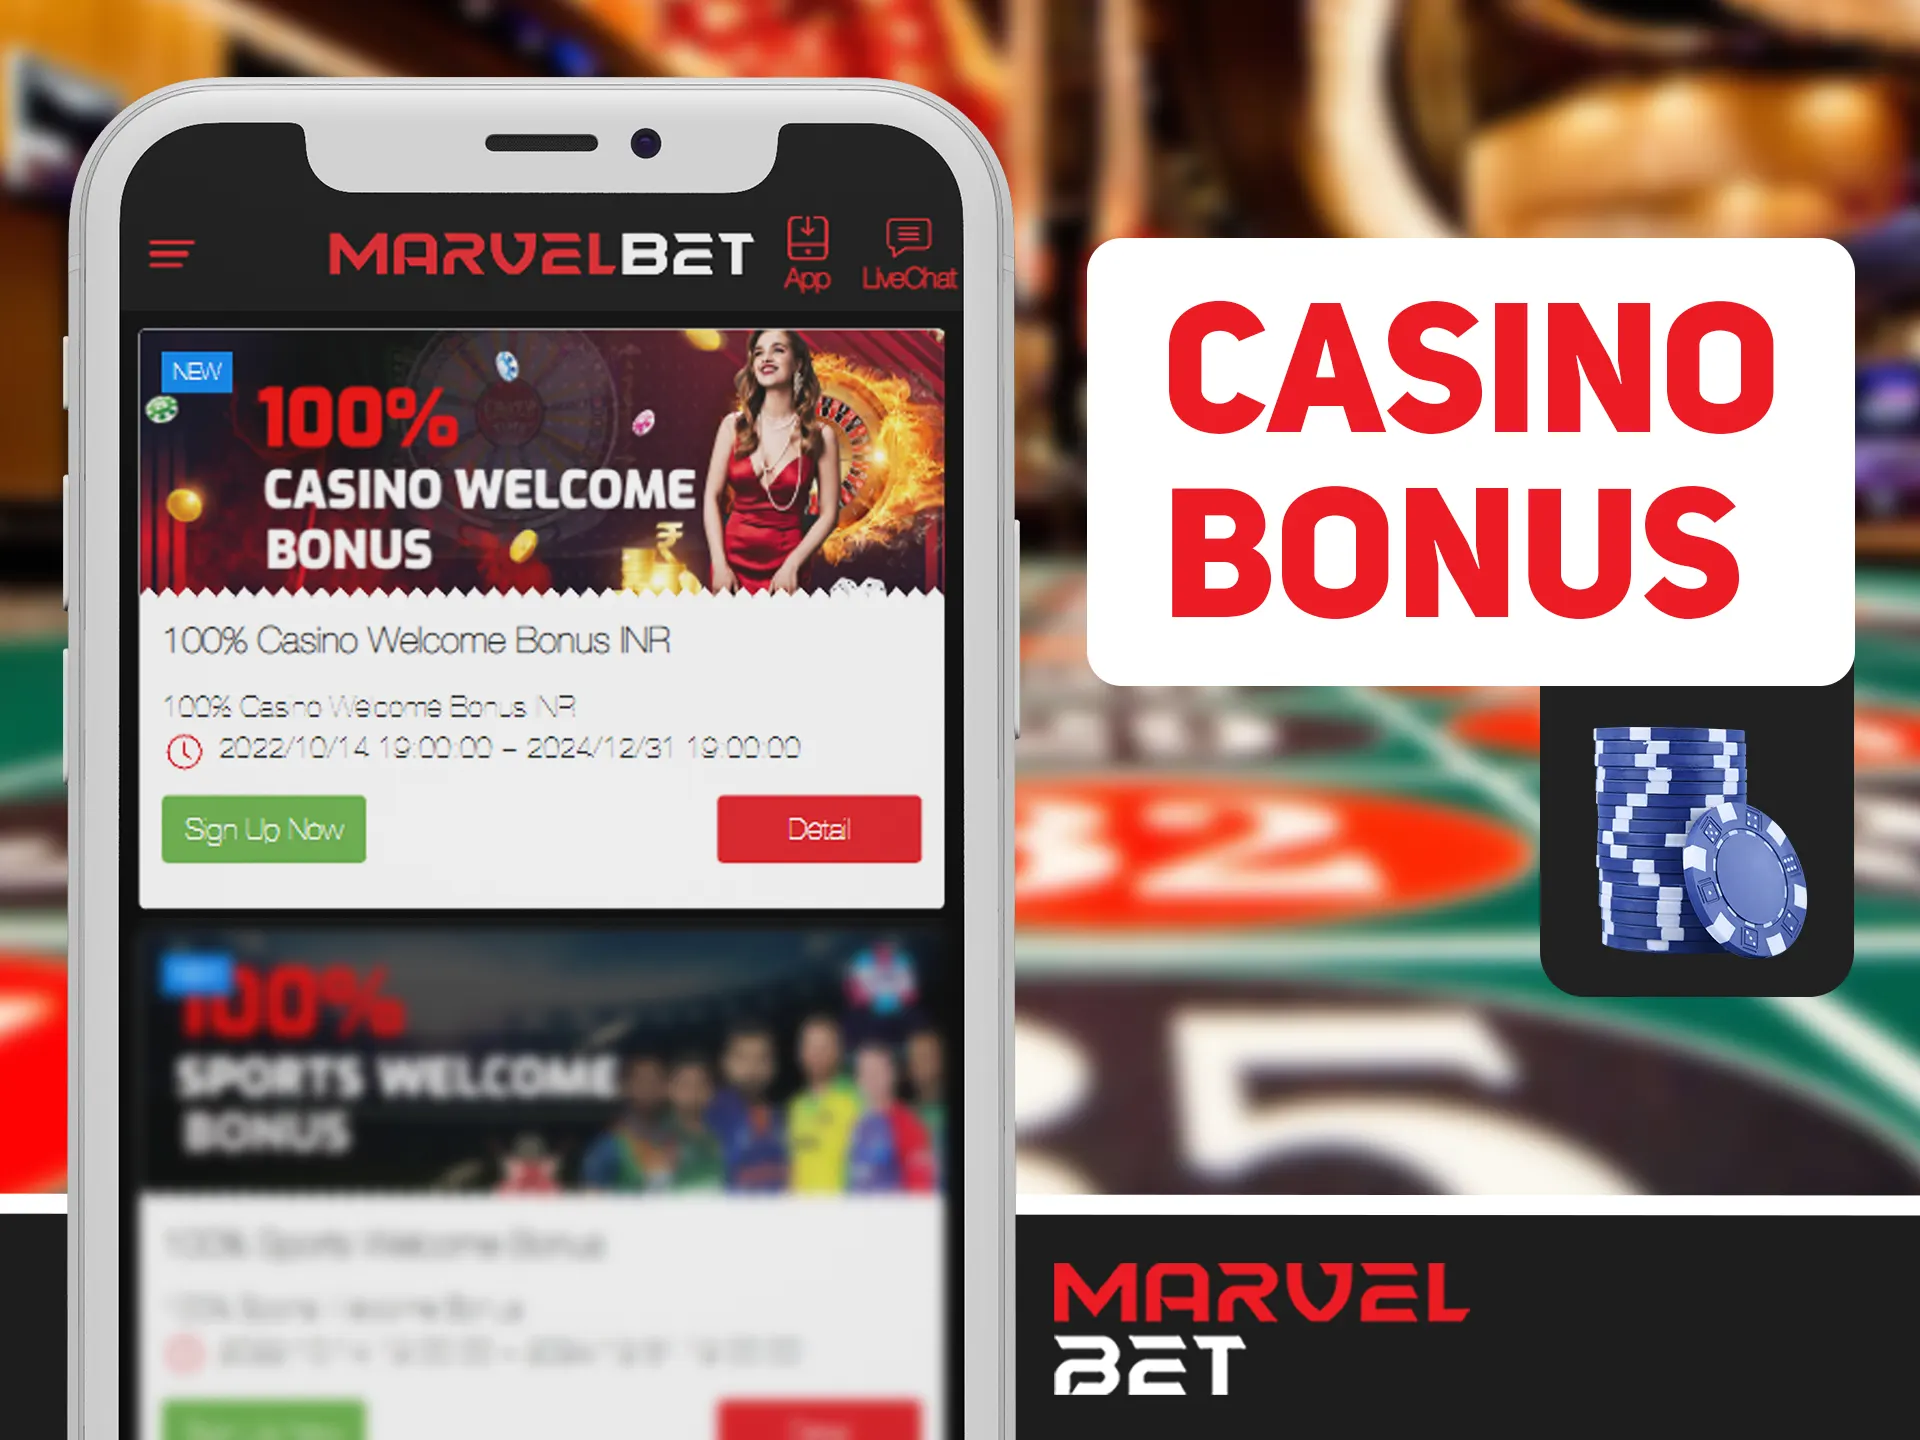 Get your casino bonus after playing some Marvelbet casino games.